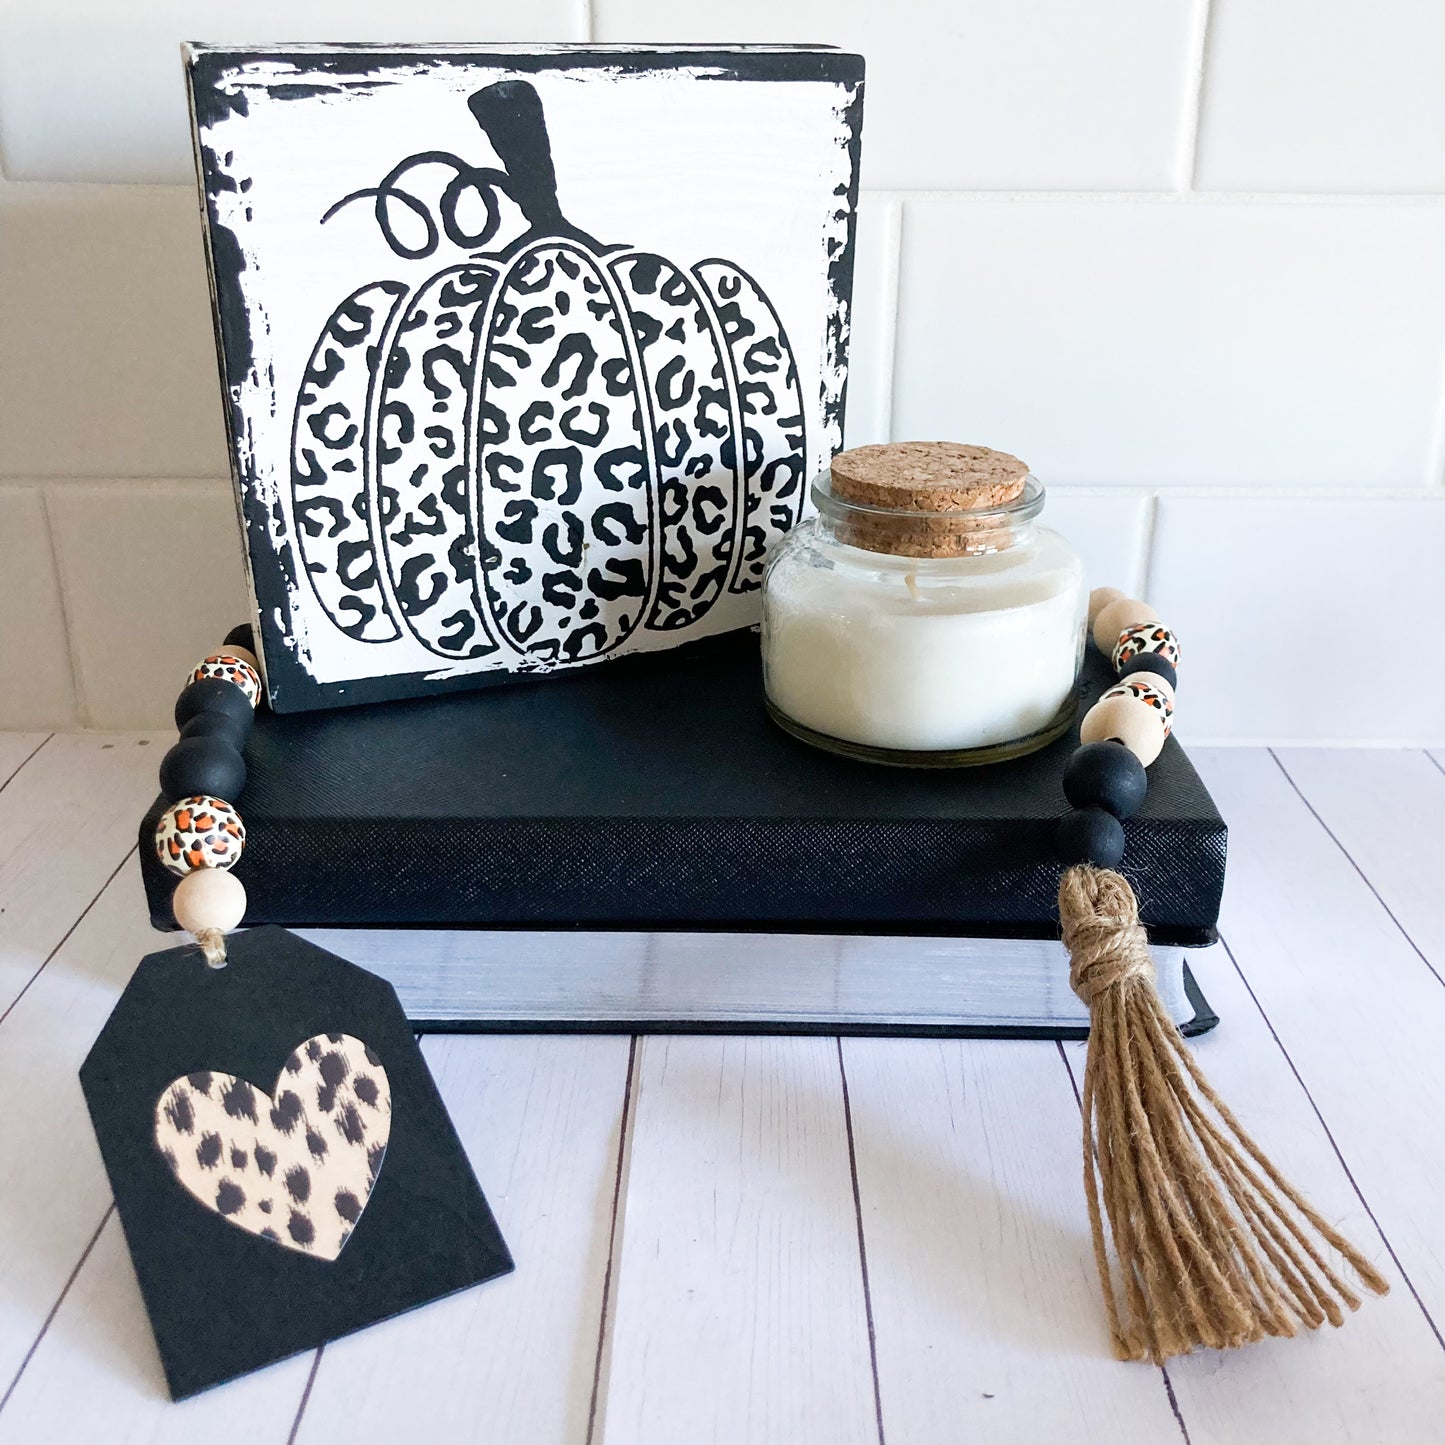 Leopard print wood bead garland with a variety of black natural and leopard printed beads jute twine tassel and black painted tag with leopard print heart 24 inches in total length displayed on a pile of books with a wood sign and candle